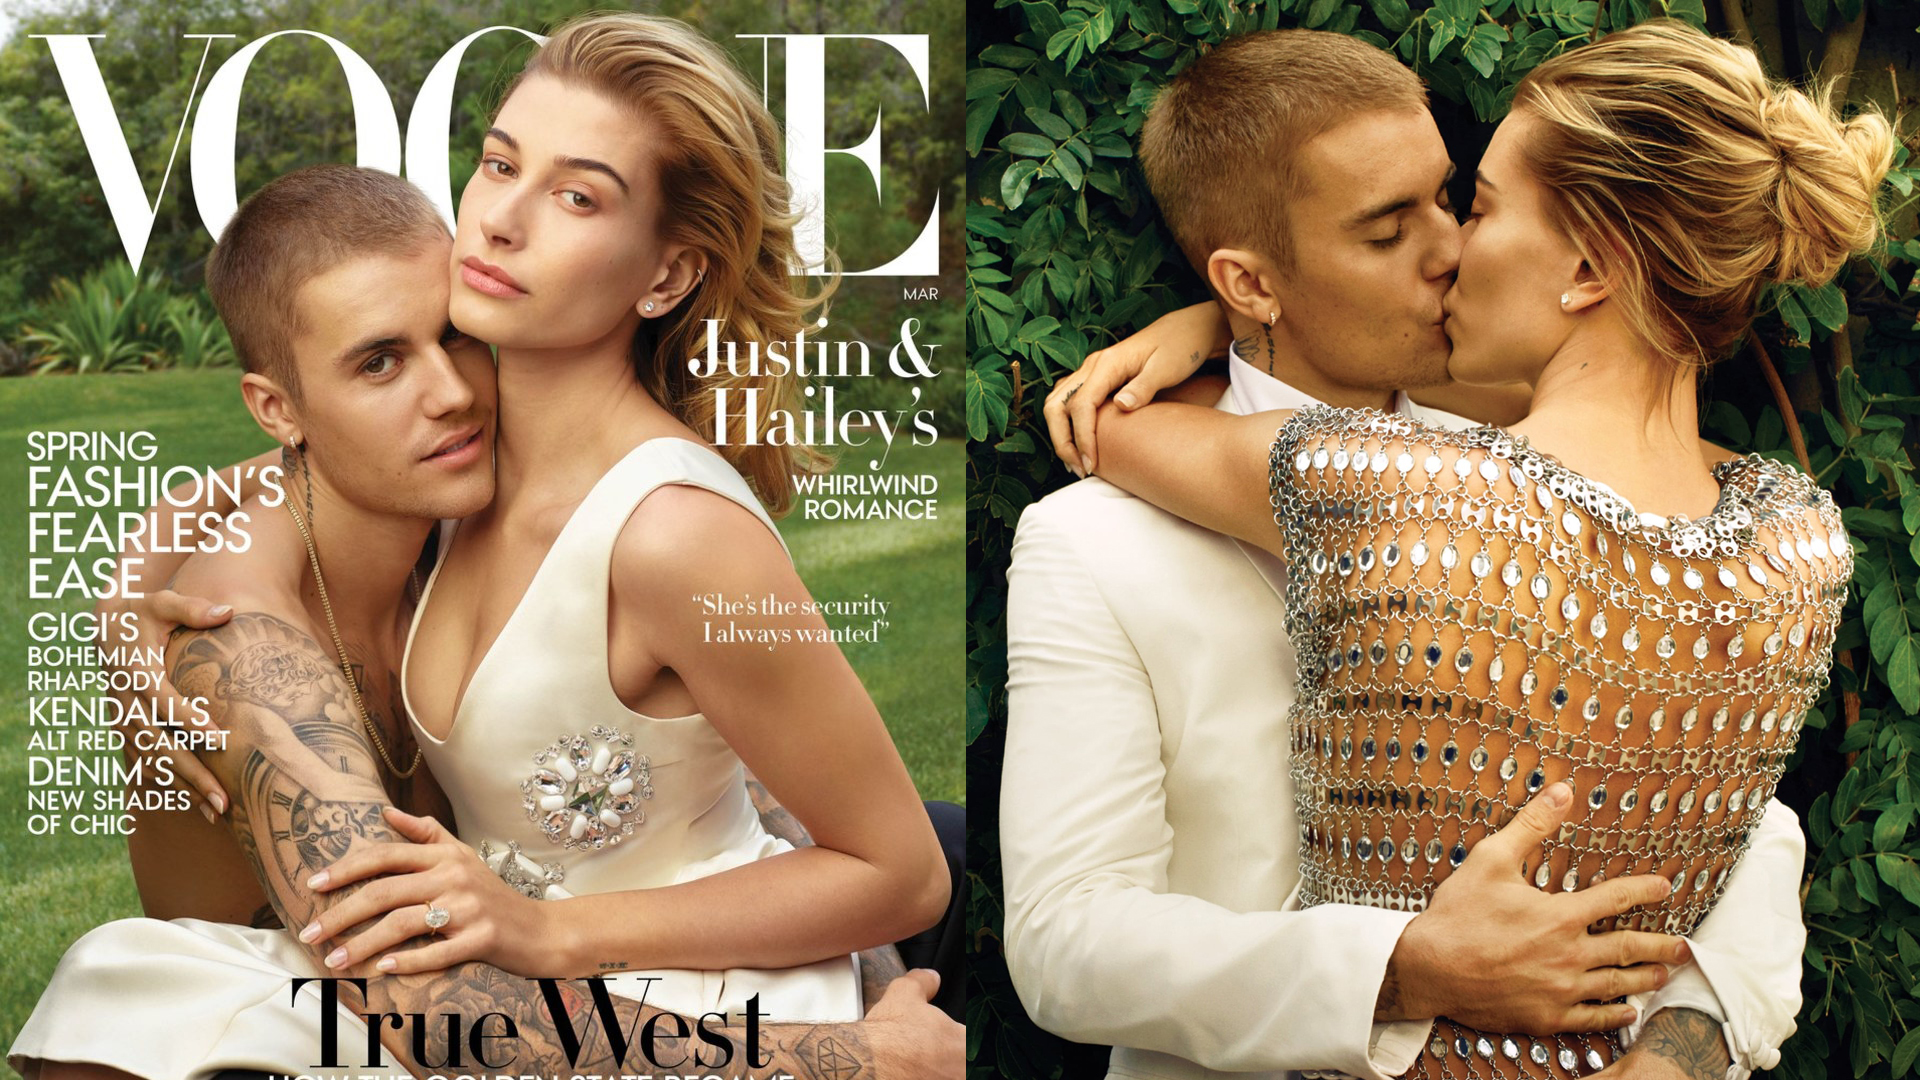 Justin and Hailey Bieber Discuss Their Faith and Marriage in Vogue Magazine Interview1920 x 1080